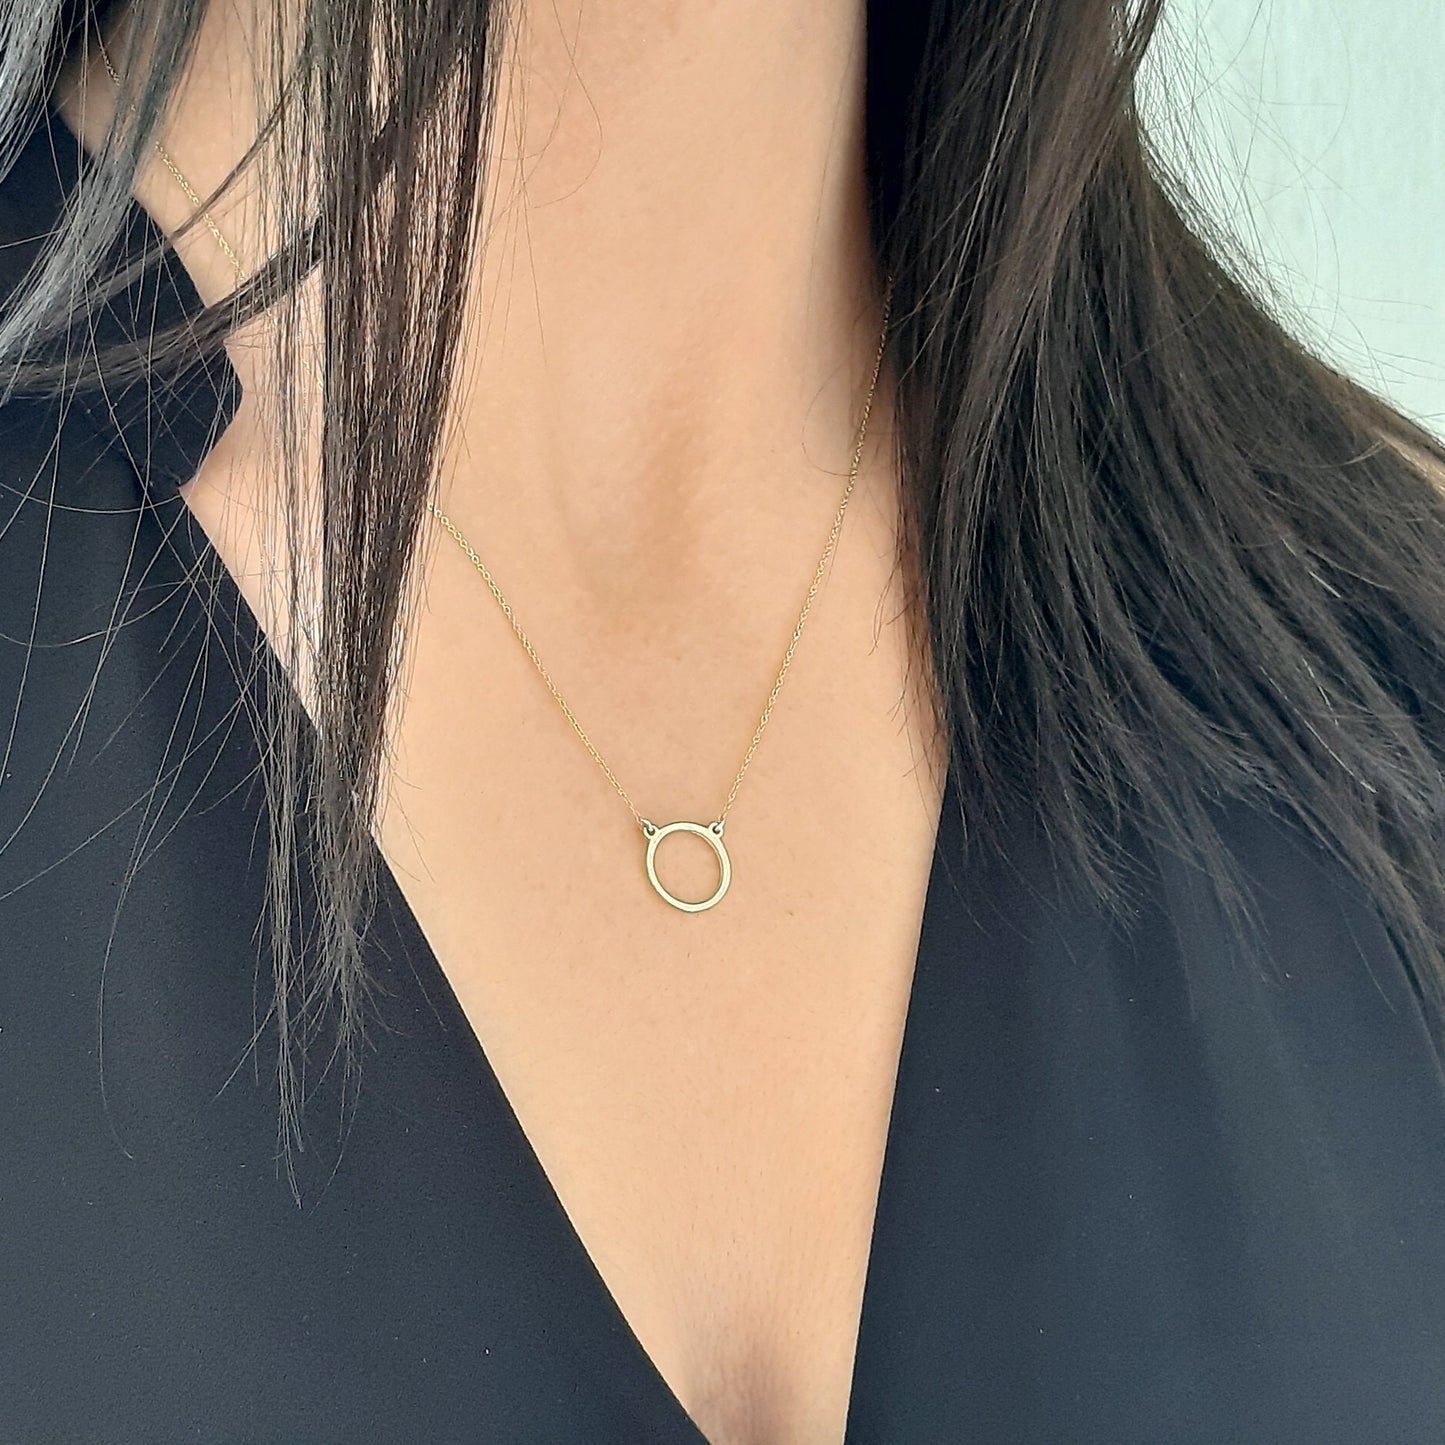 Circle Necklace, 14k solid gold , Dainty Gold circle, Karma Necklace, solid gold chain, Eternity, Simple Open Circle,  layered necklace gift